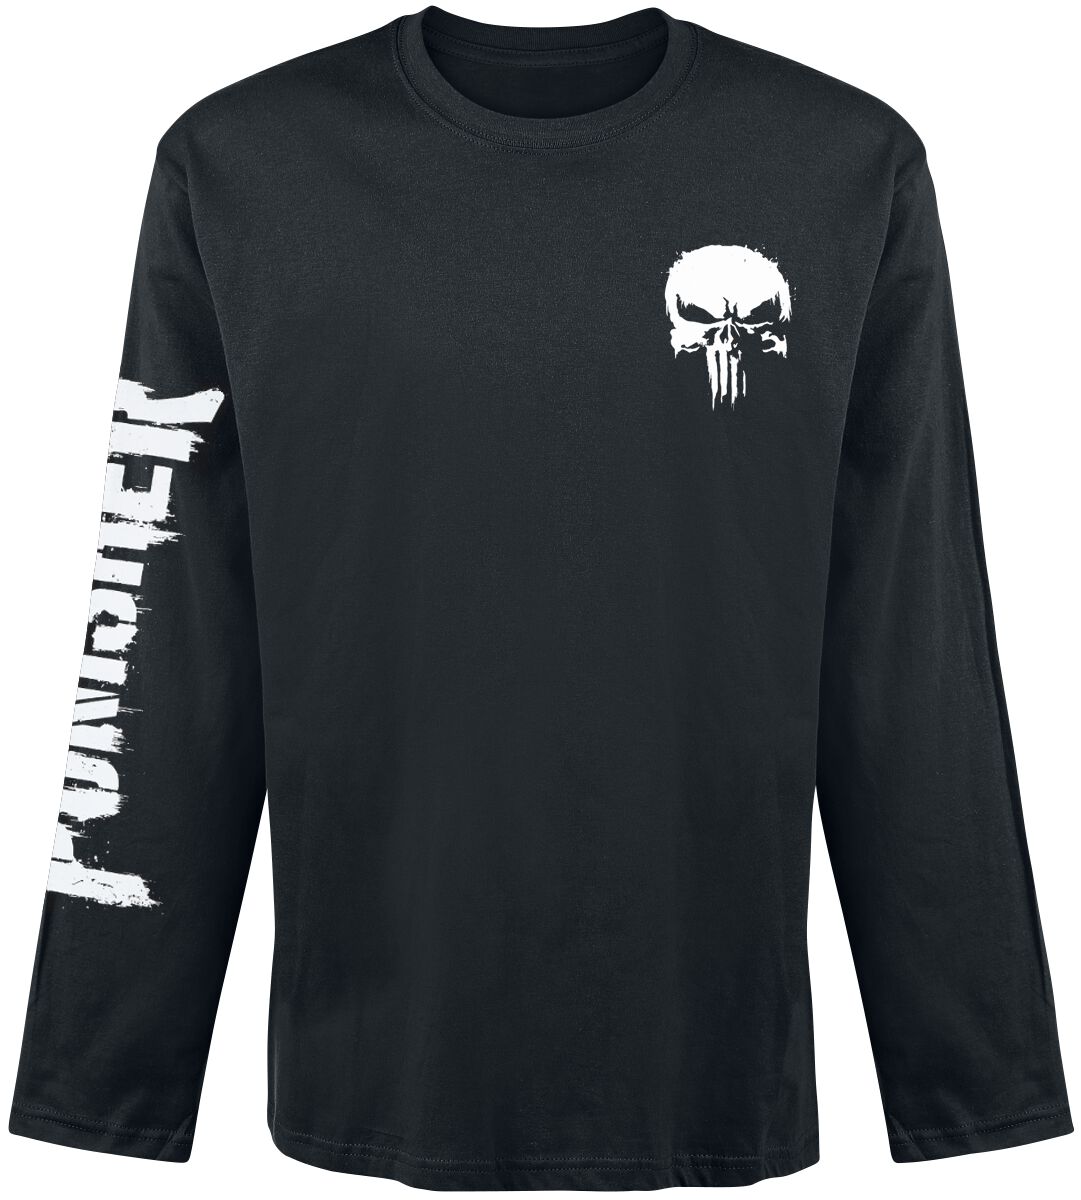 The Punisher Logo and Lettering Long-sleeve Shirt black